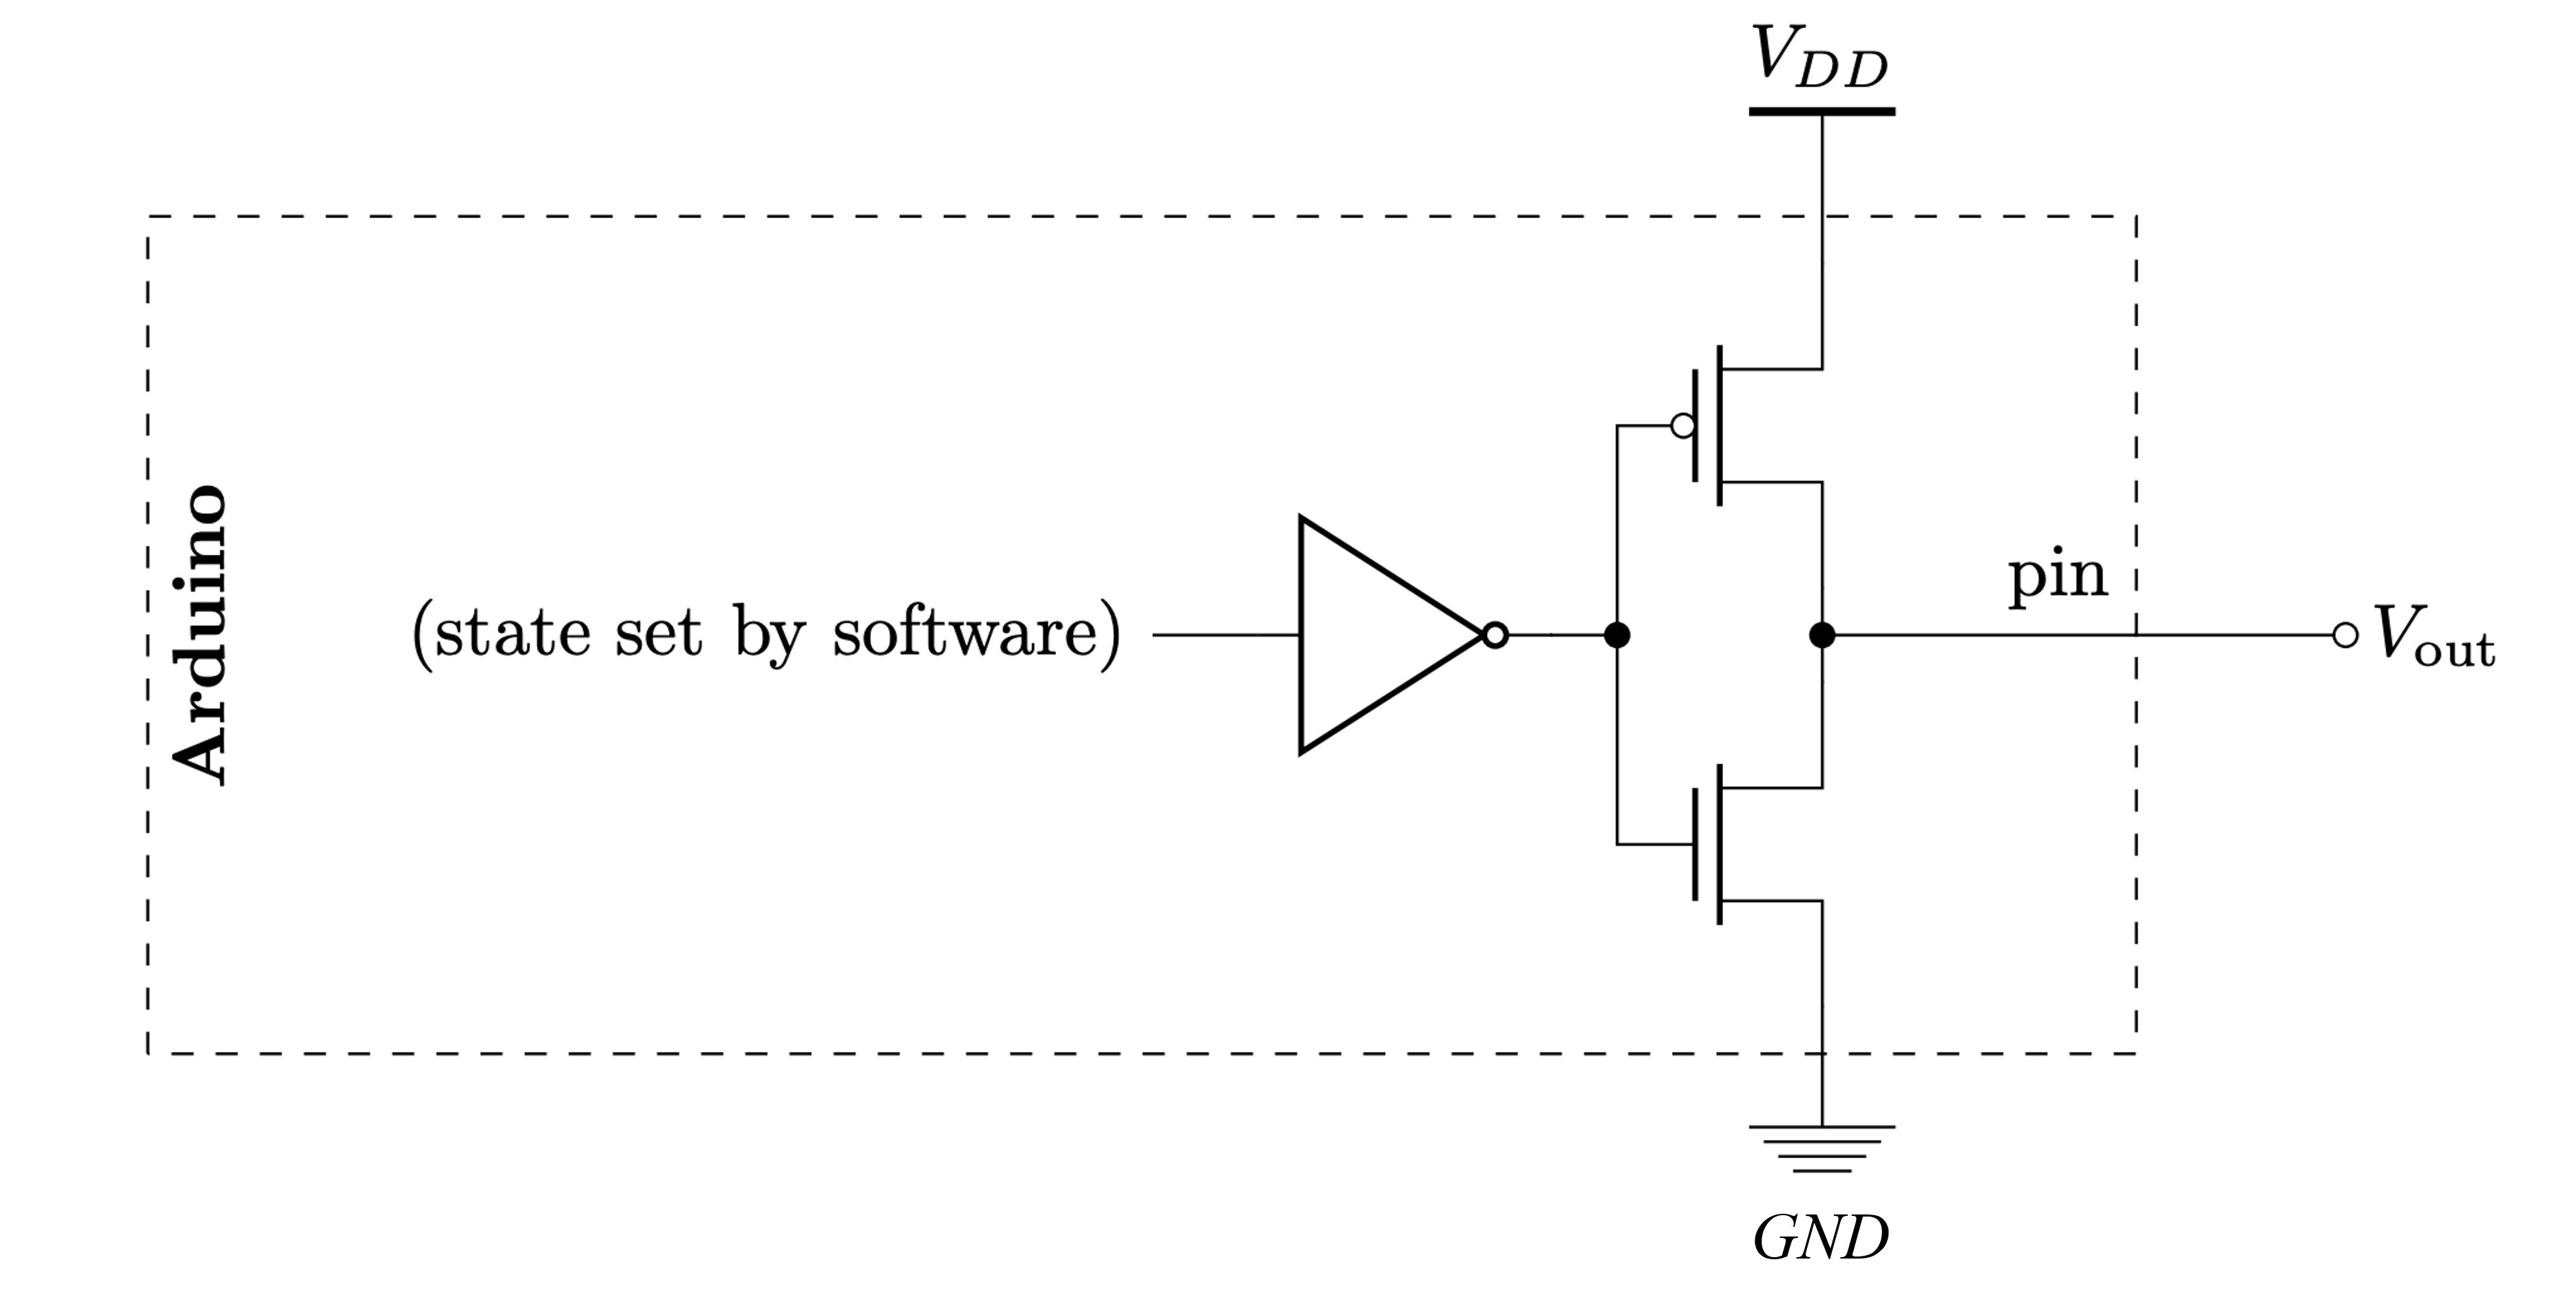 A simplified schematic by Chuan-Zheng Lee showing that an output pin provides VDD or 0 V by making a connection to VDD or ground via a transistor